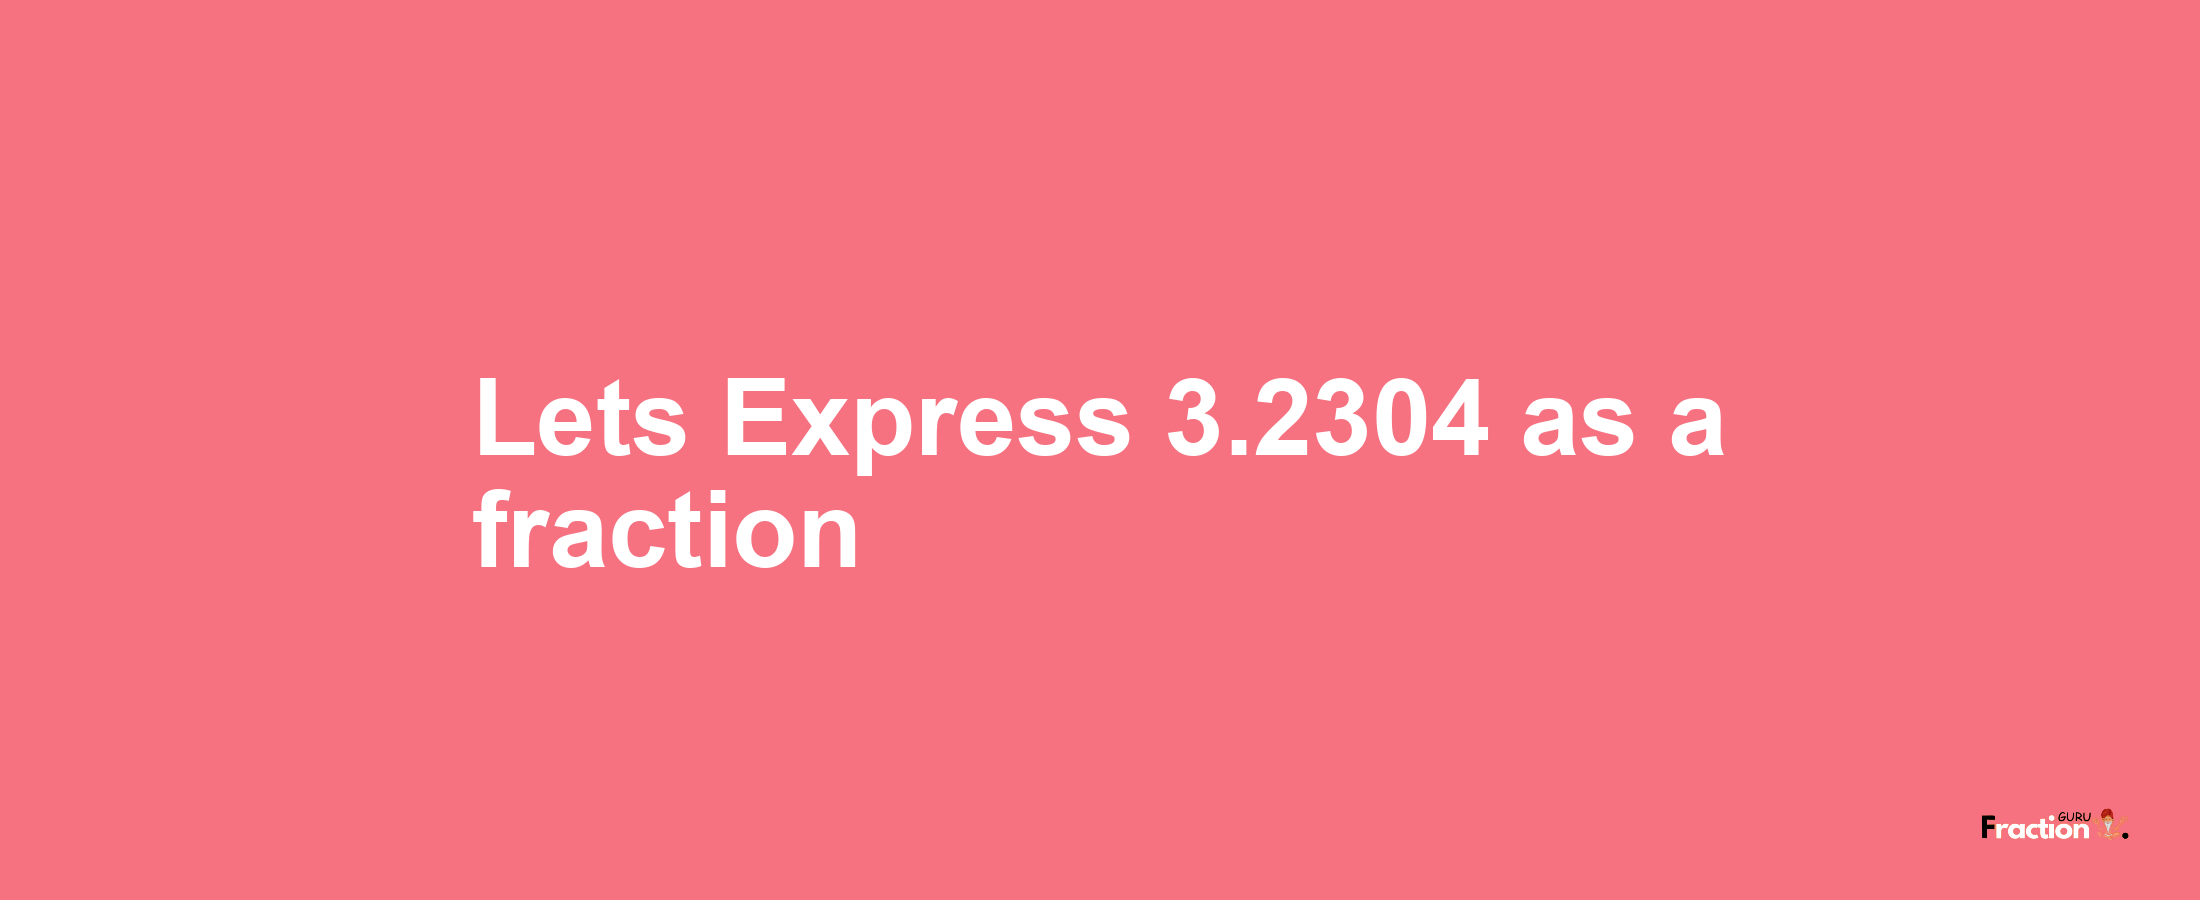 Lets Express 3.2304 as afraction